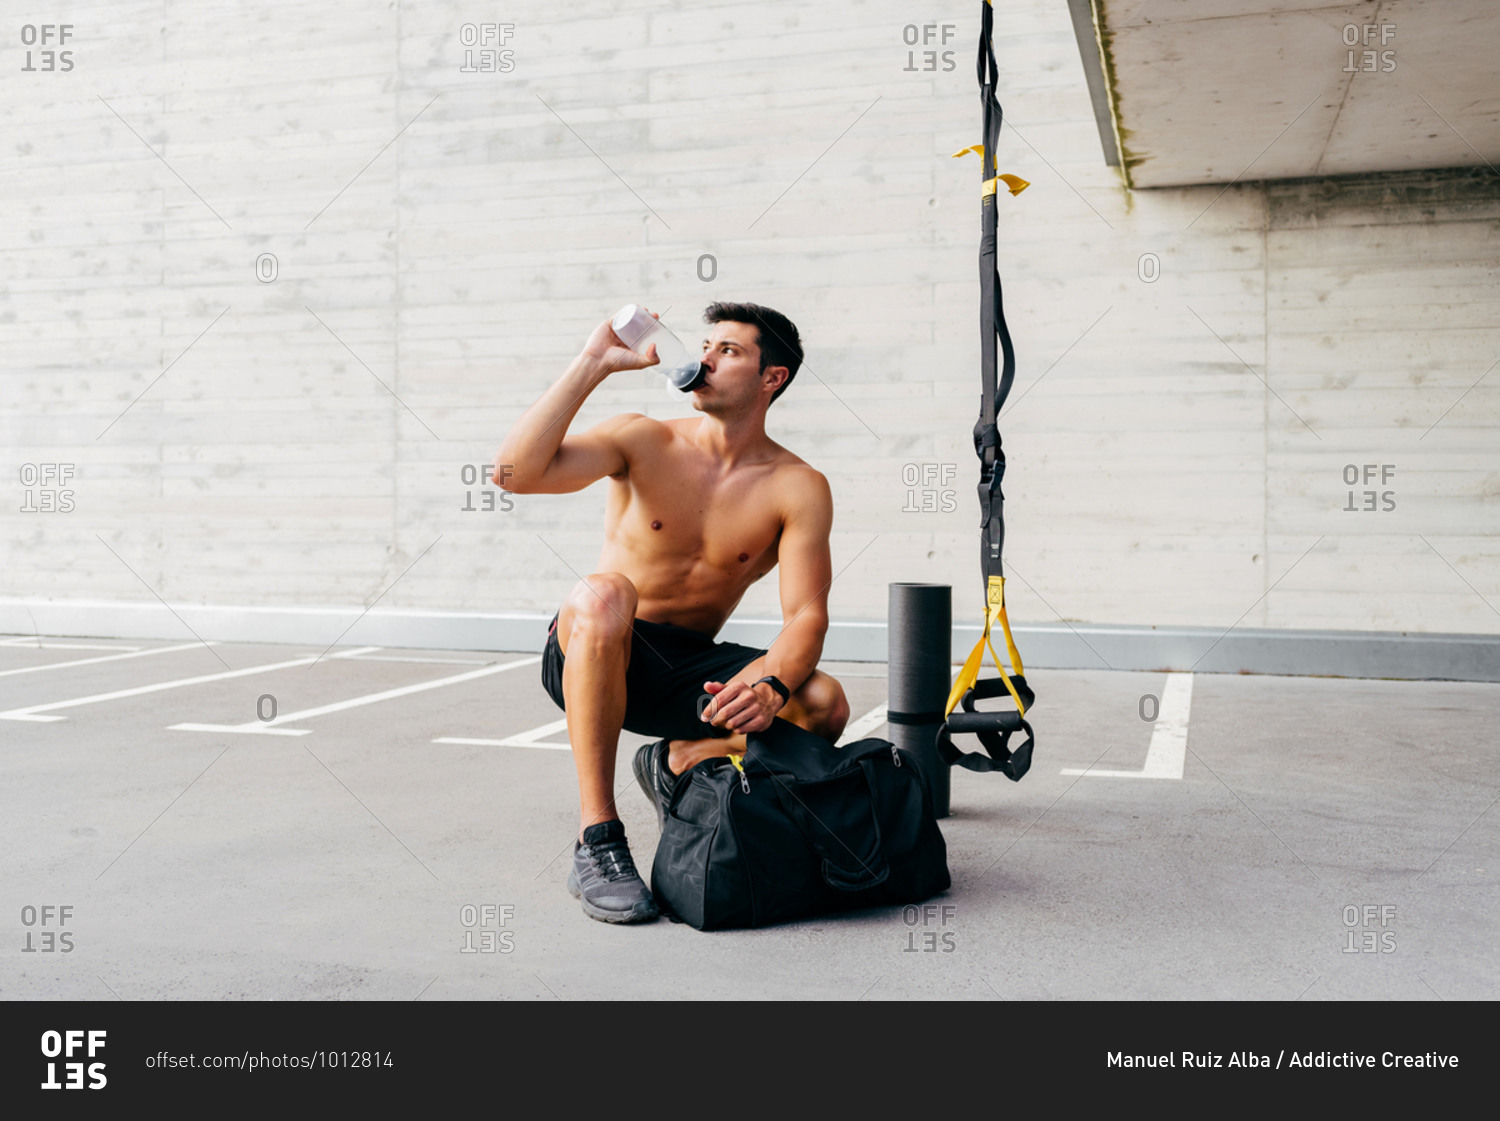 Relaxed sportsman with naked muscular torso crouching on street and drinking clean water from bottle after workout in city